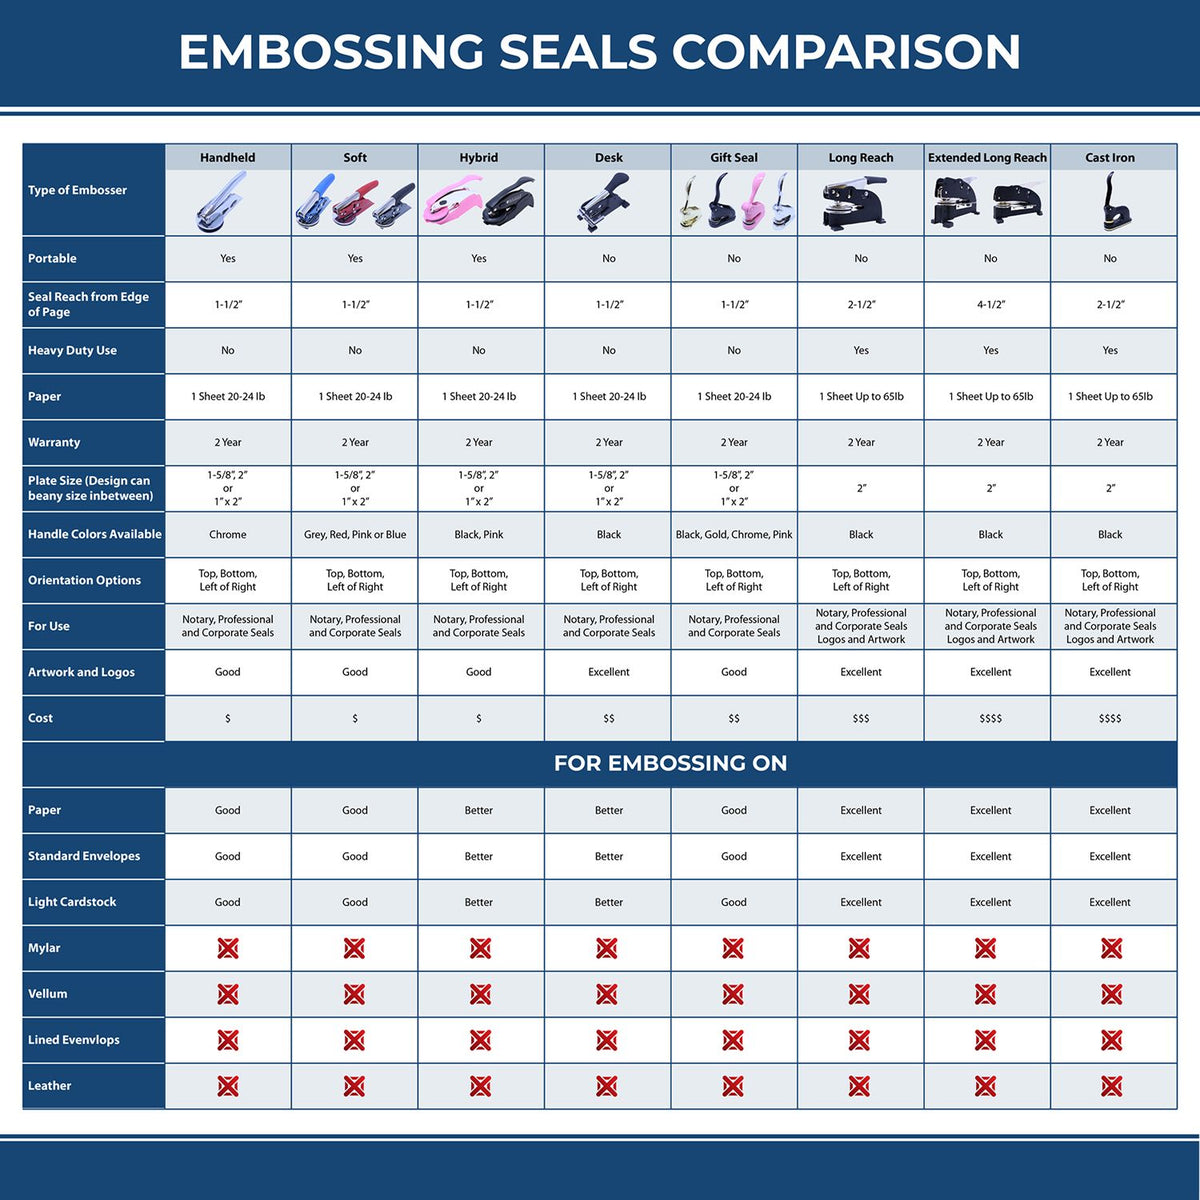 A comparison chart for the different types of mount models available for the Handheld Mississippi Professional Geologist Embosser